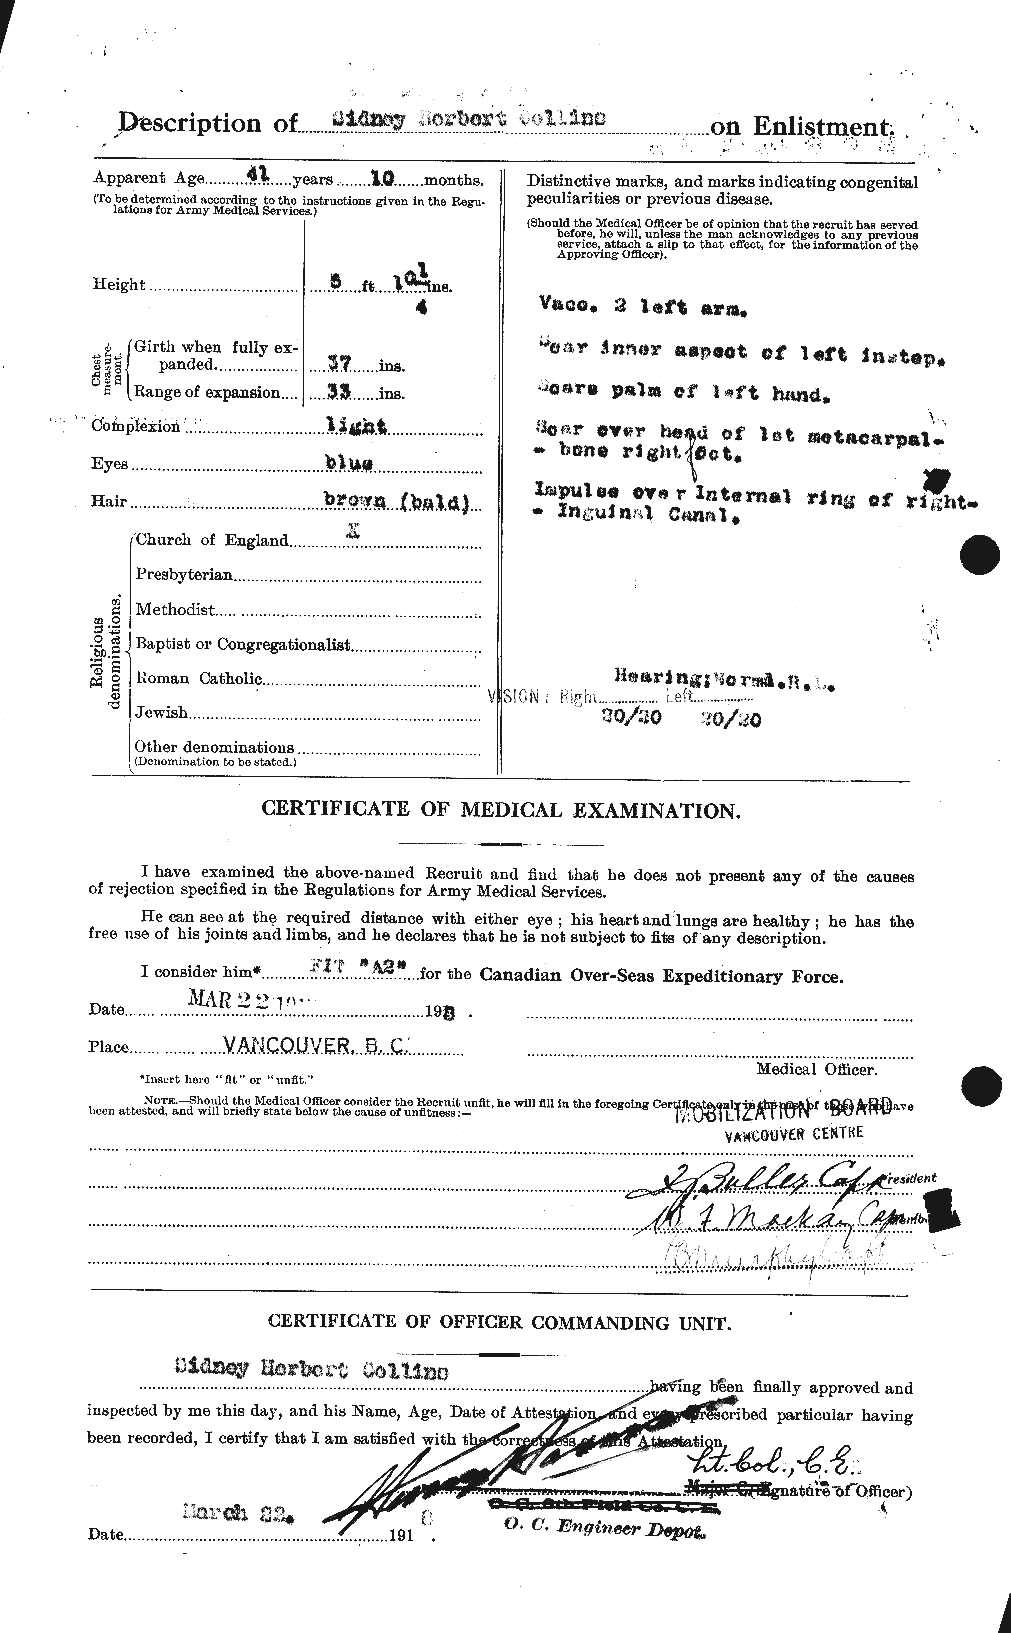 Personnel Records of the First World War - CEF 069156b